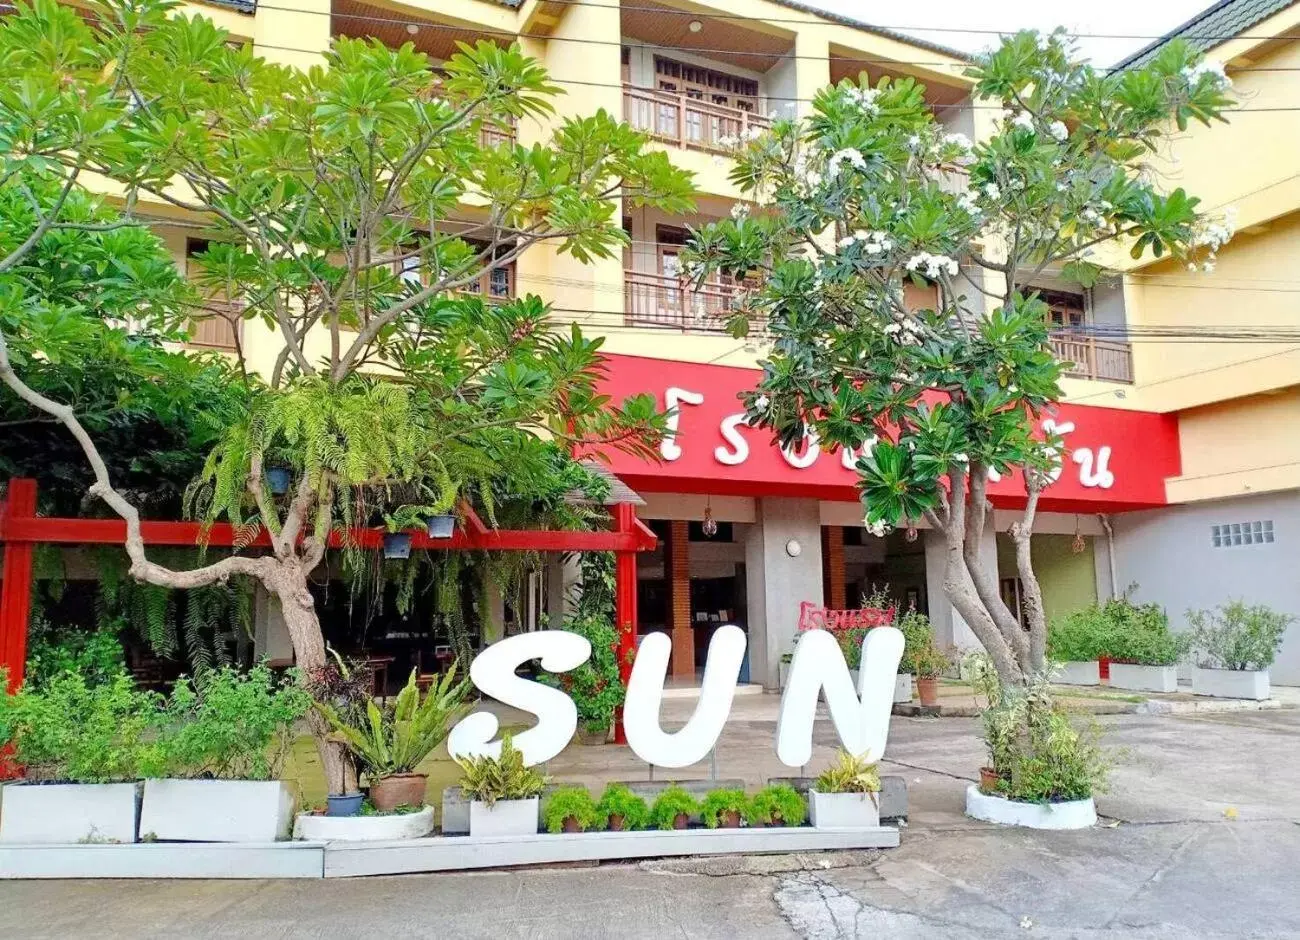 Property building in Sun Hotel